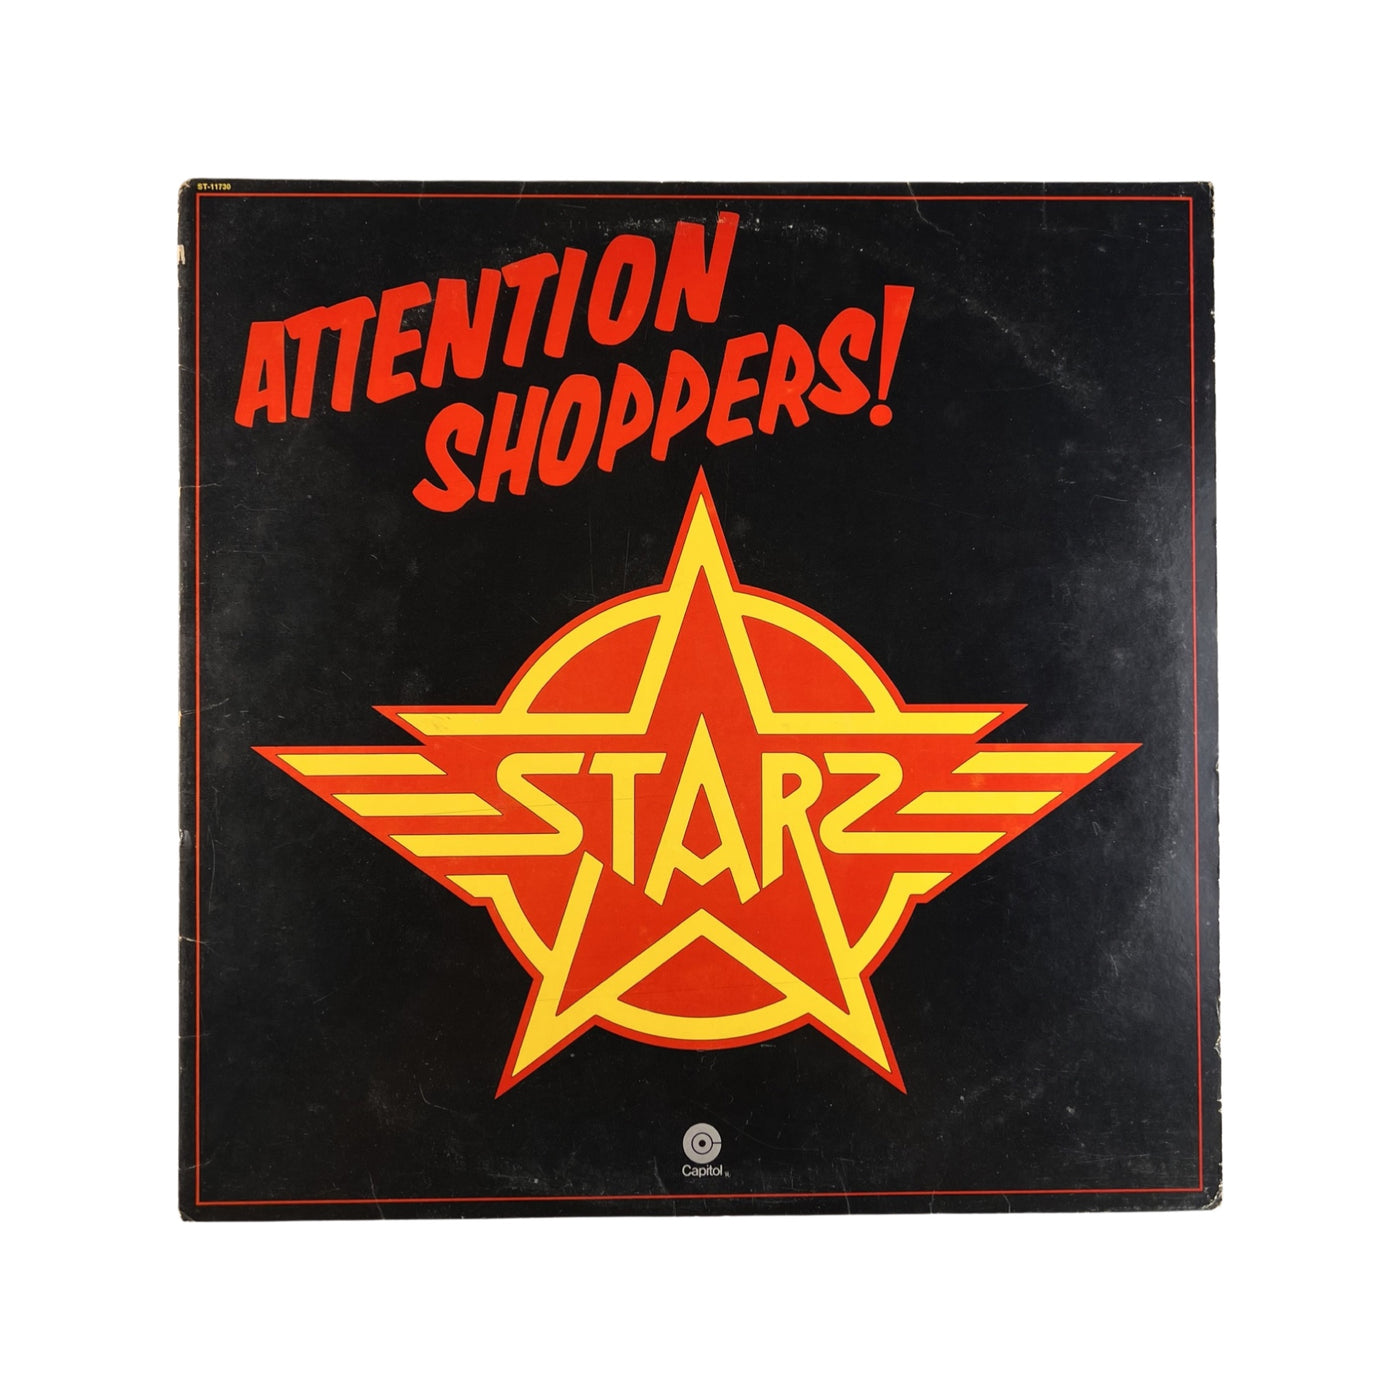 Starz – Attention Shoppers!